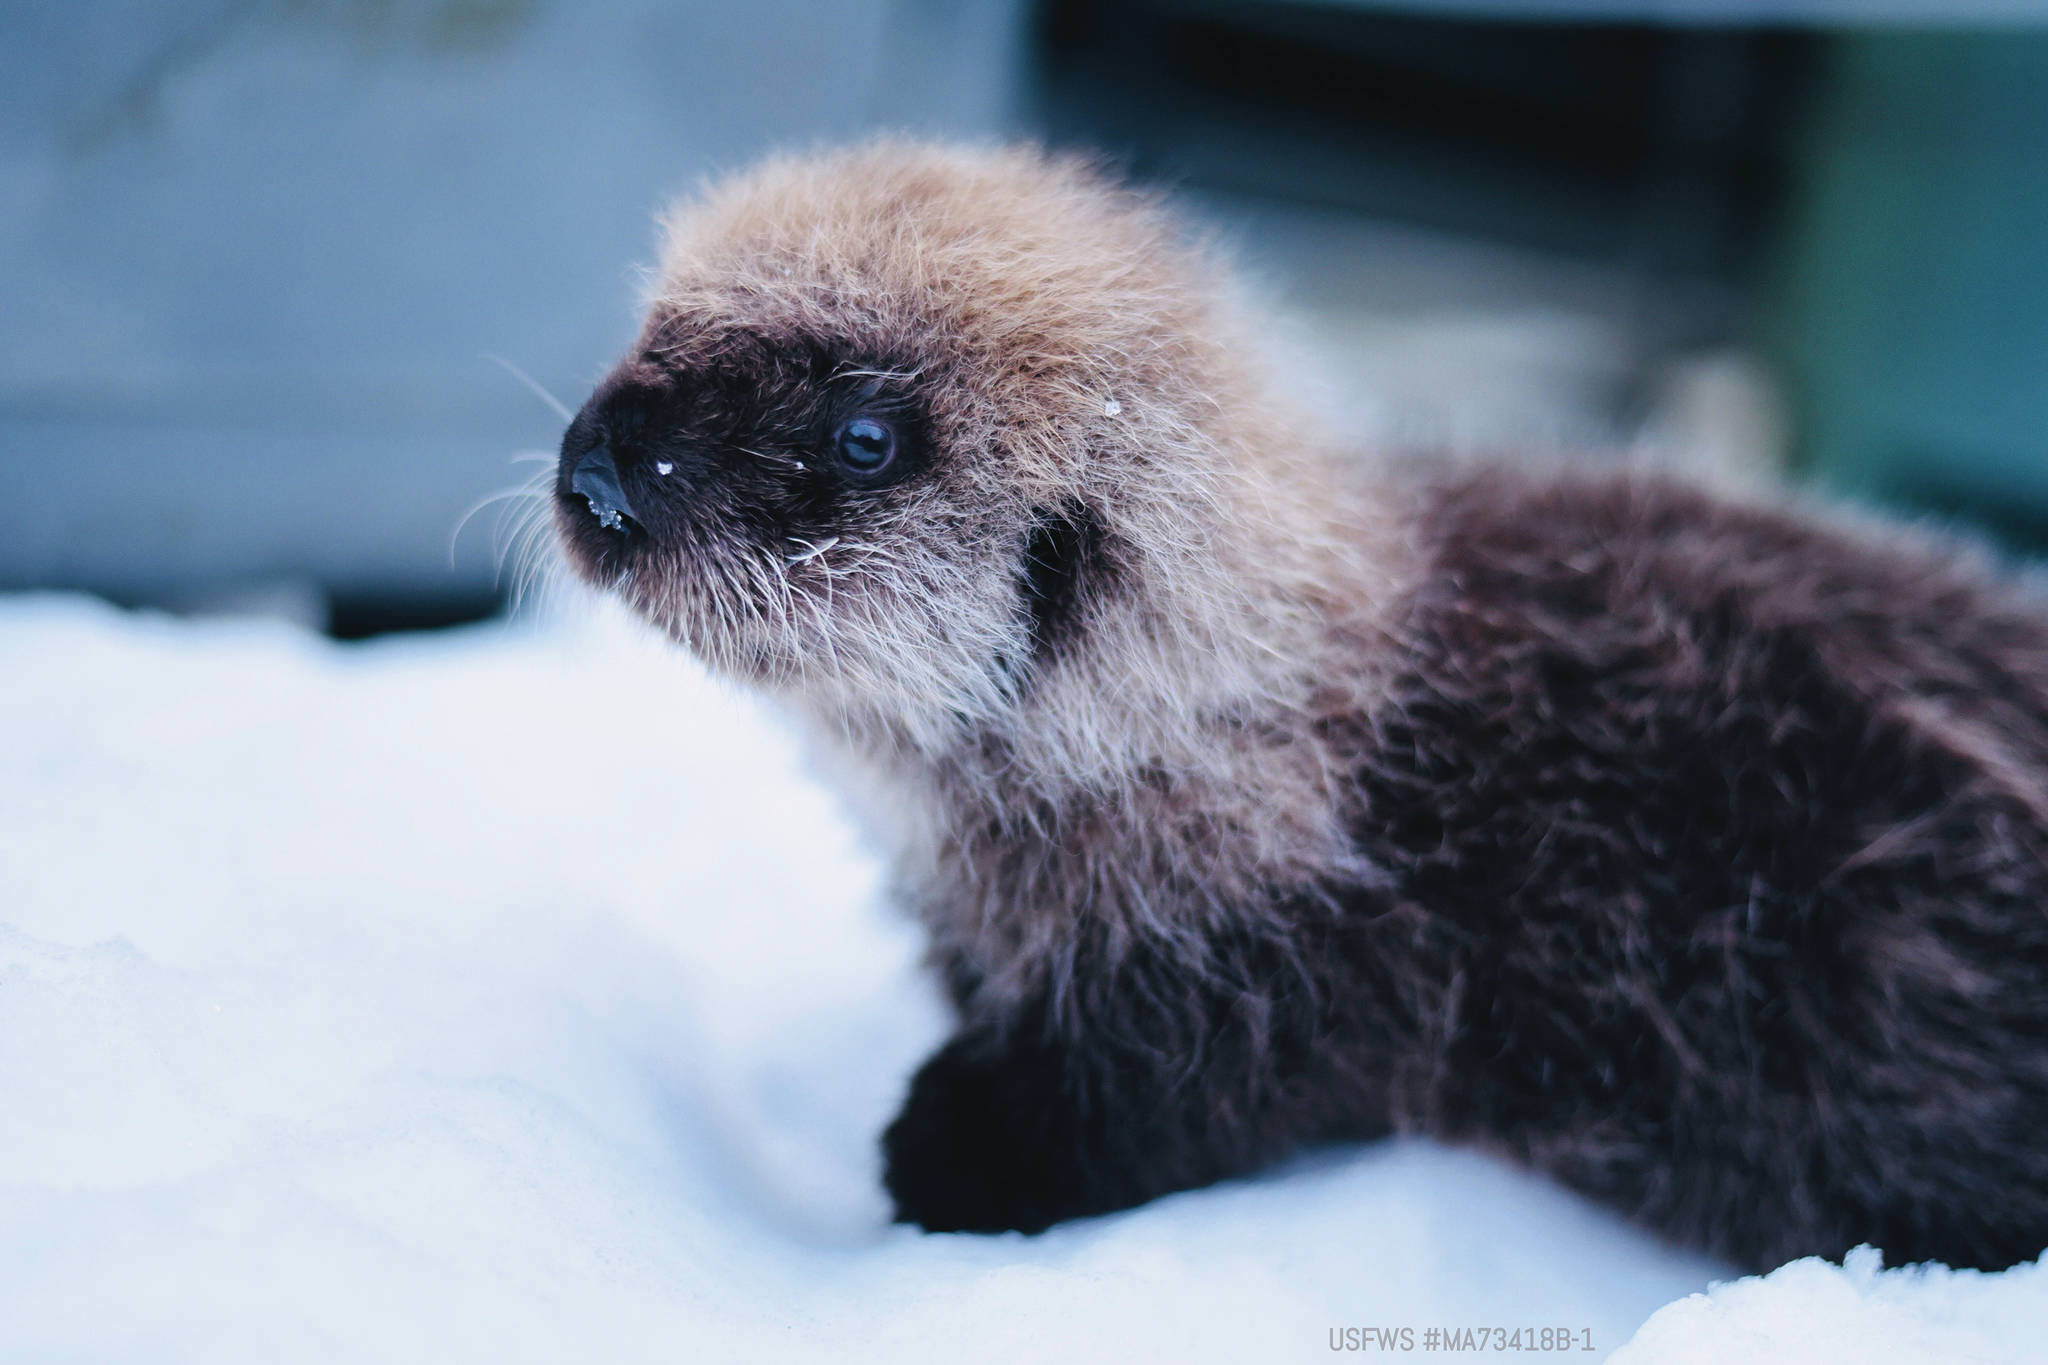 Alaska SeaLife Center
A sea otter pup rescued in Homer is being cared for at the Alaska SeaLife Center in Seward.